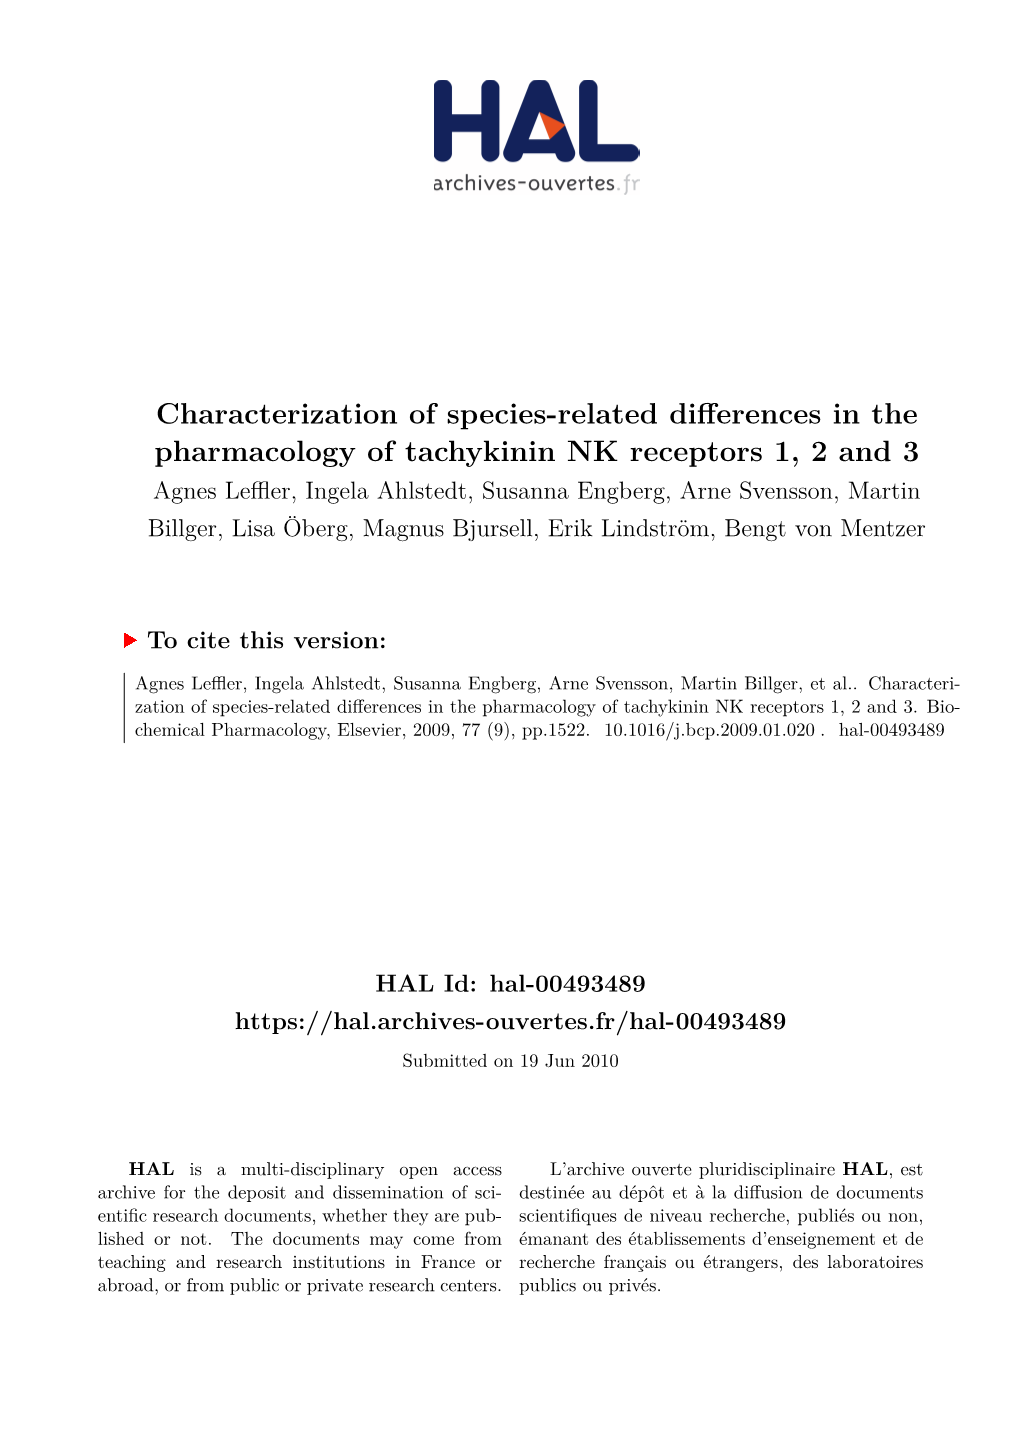 Characterization of Species-Related Differences in the Pharmacology Of